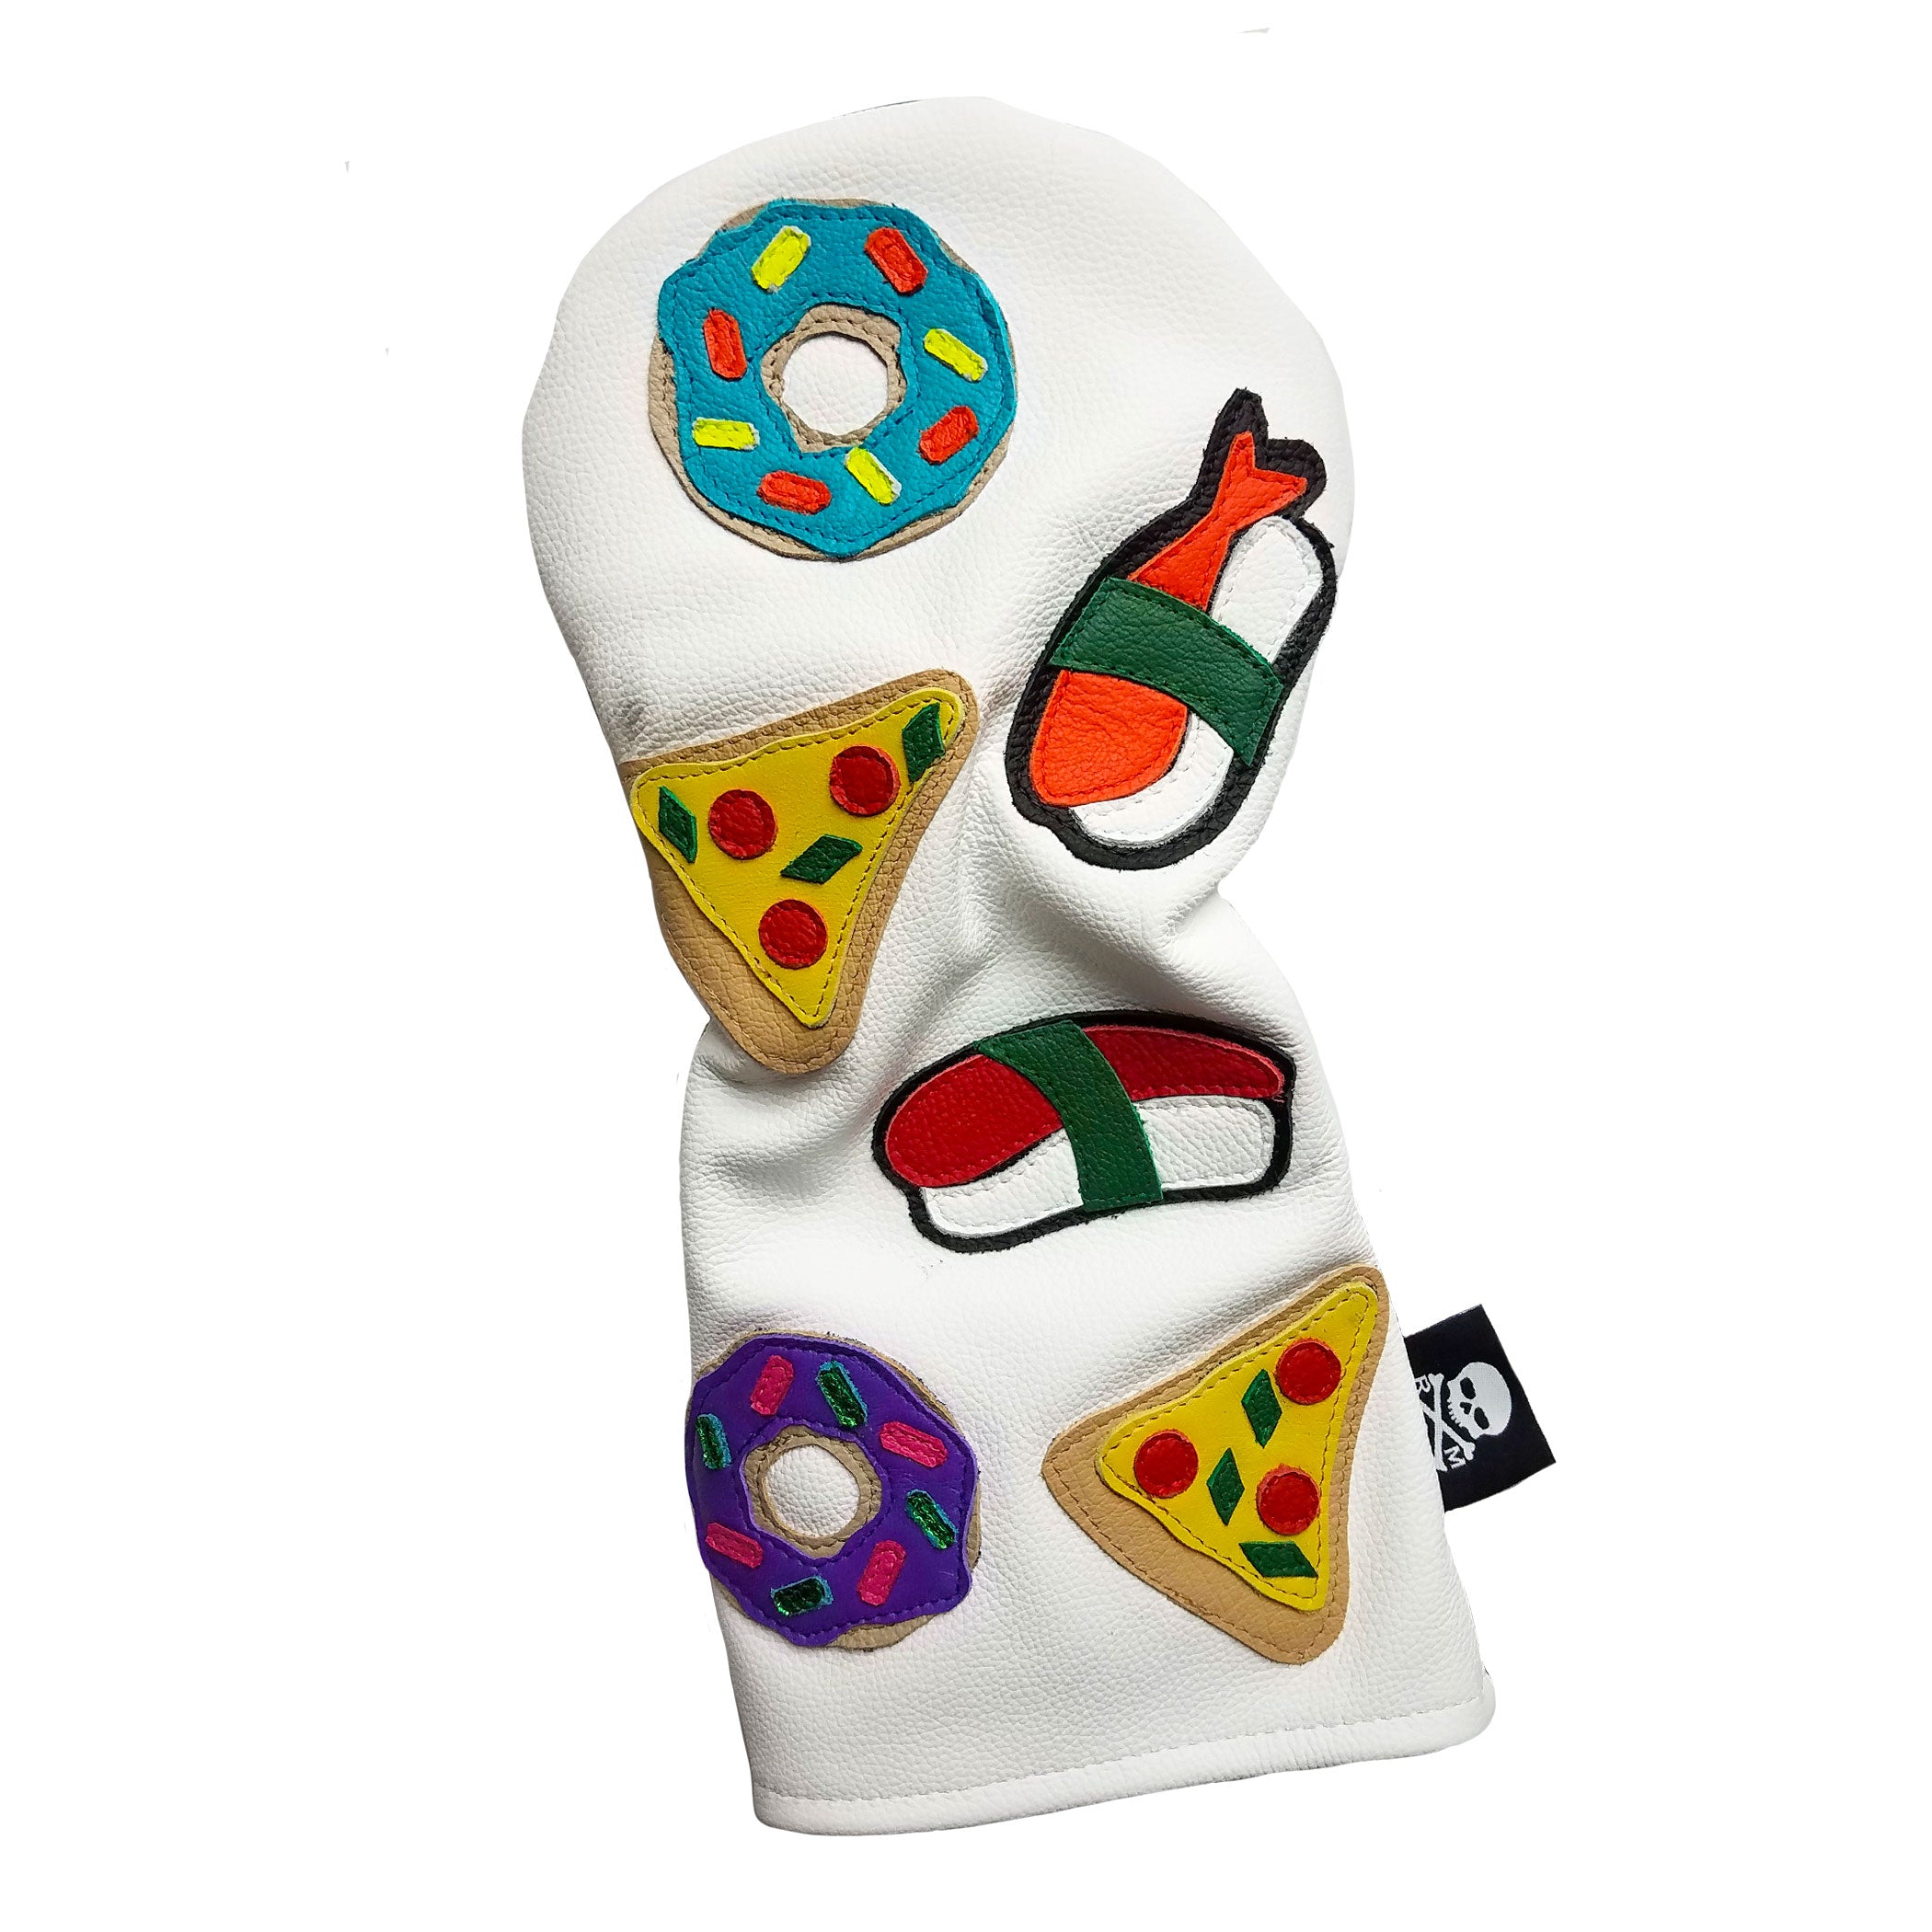 The Sushi Donut Pizza Combo Driver Headcover - Robert Mark Golf